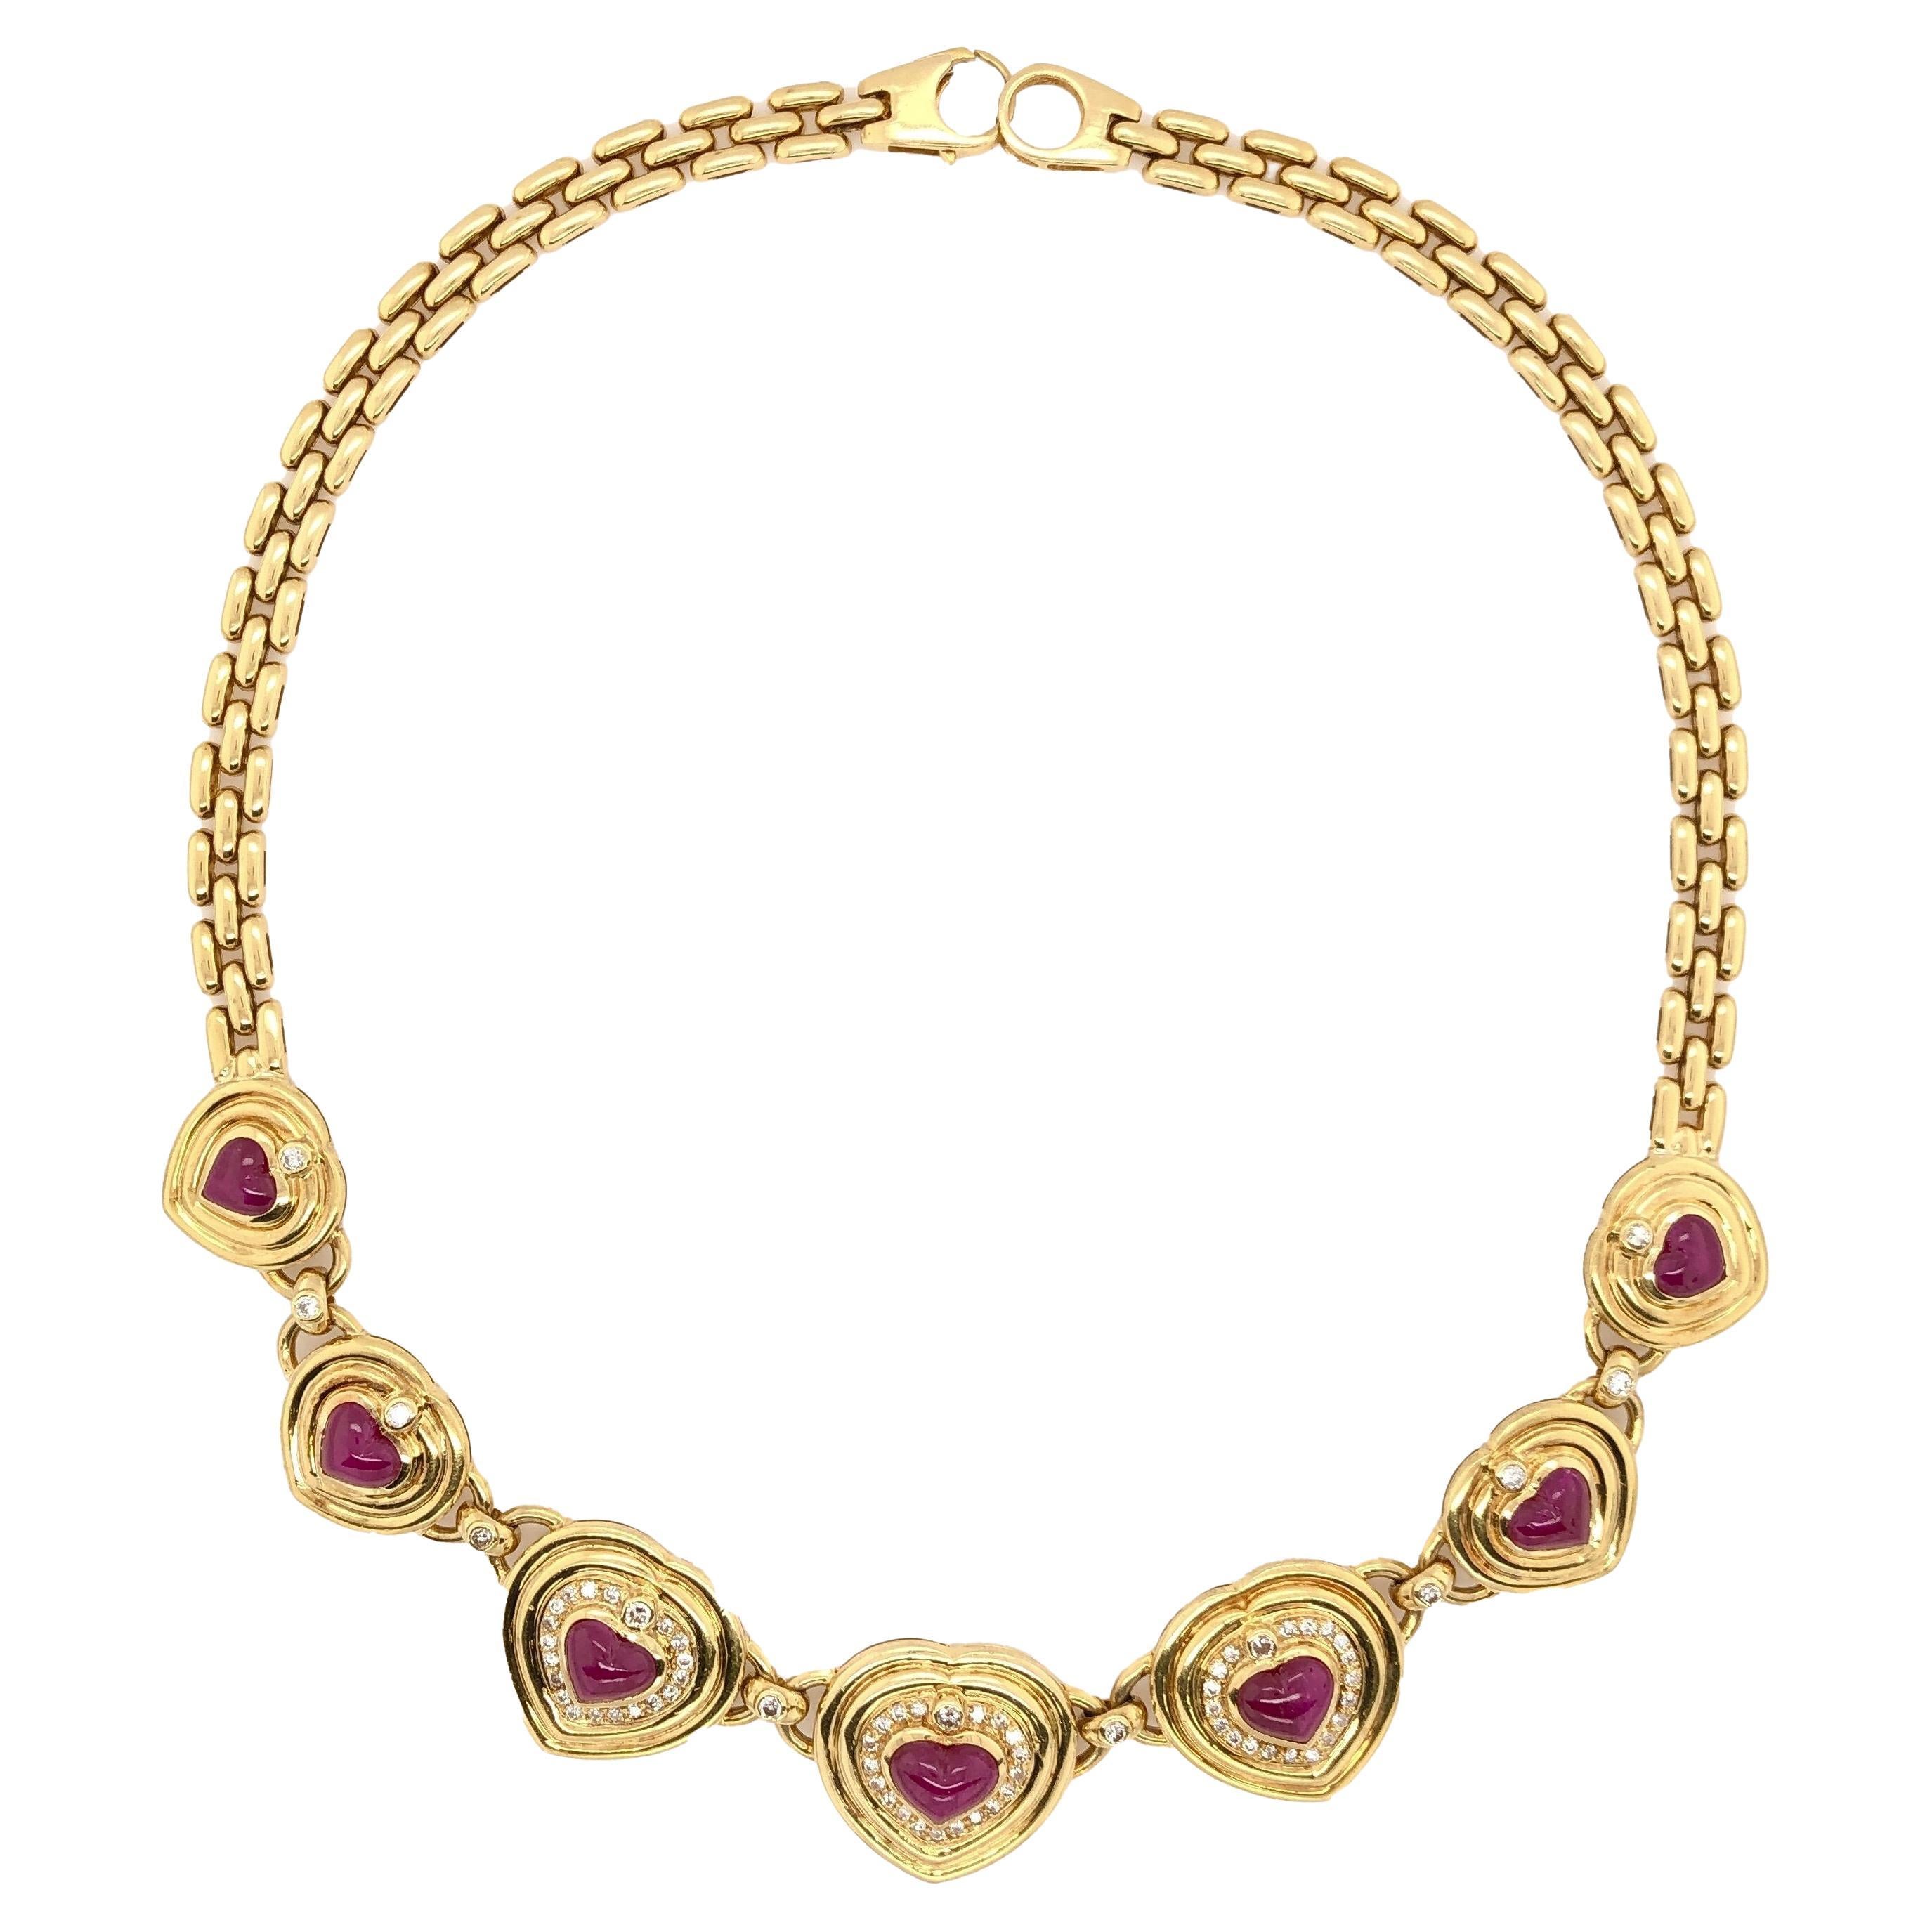 Seven Hearts Shaped Ruby and Diamond Necklace 18k Yellow Gold Panther Link Chain